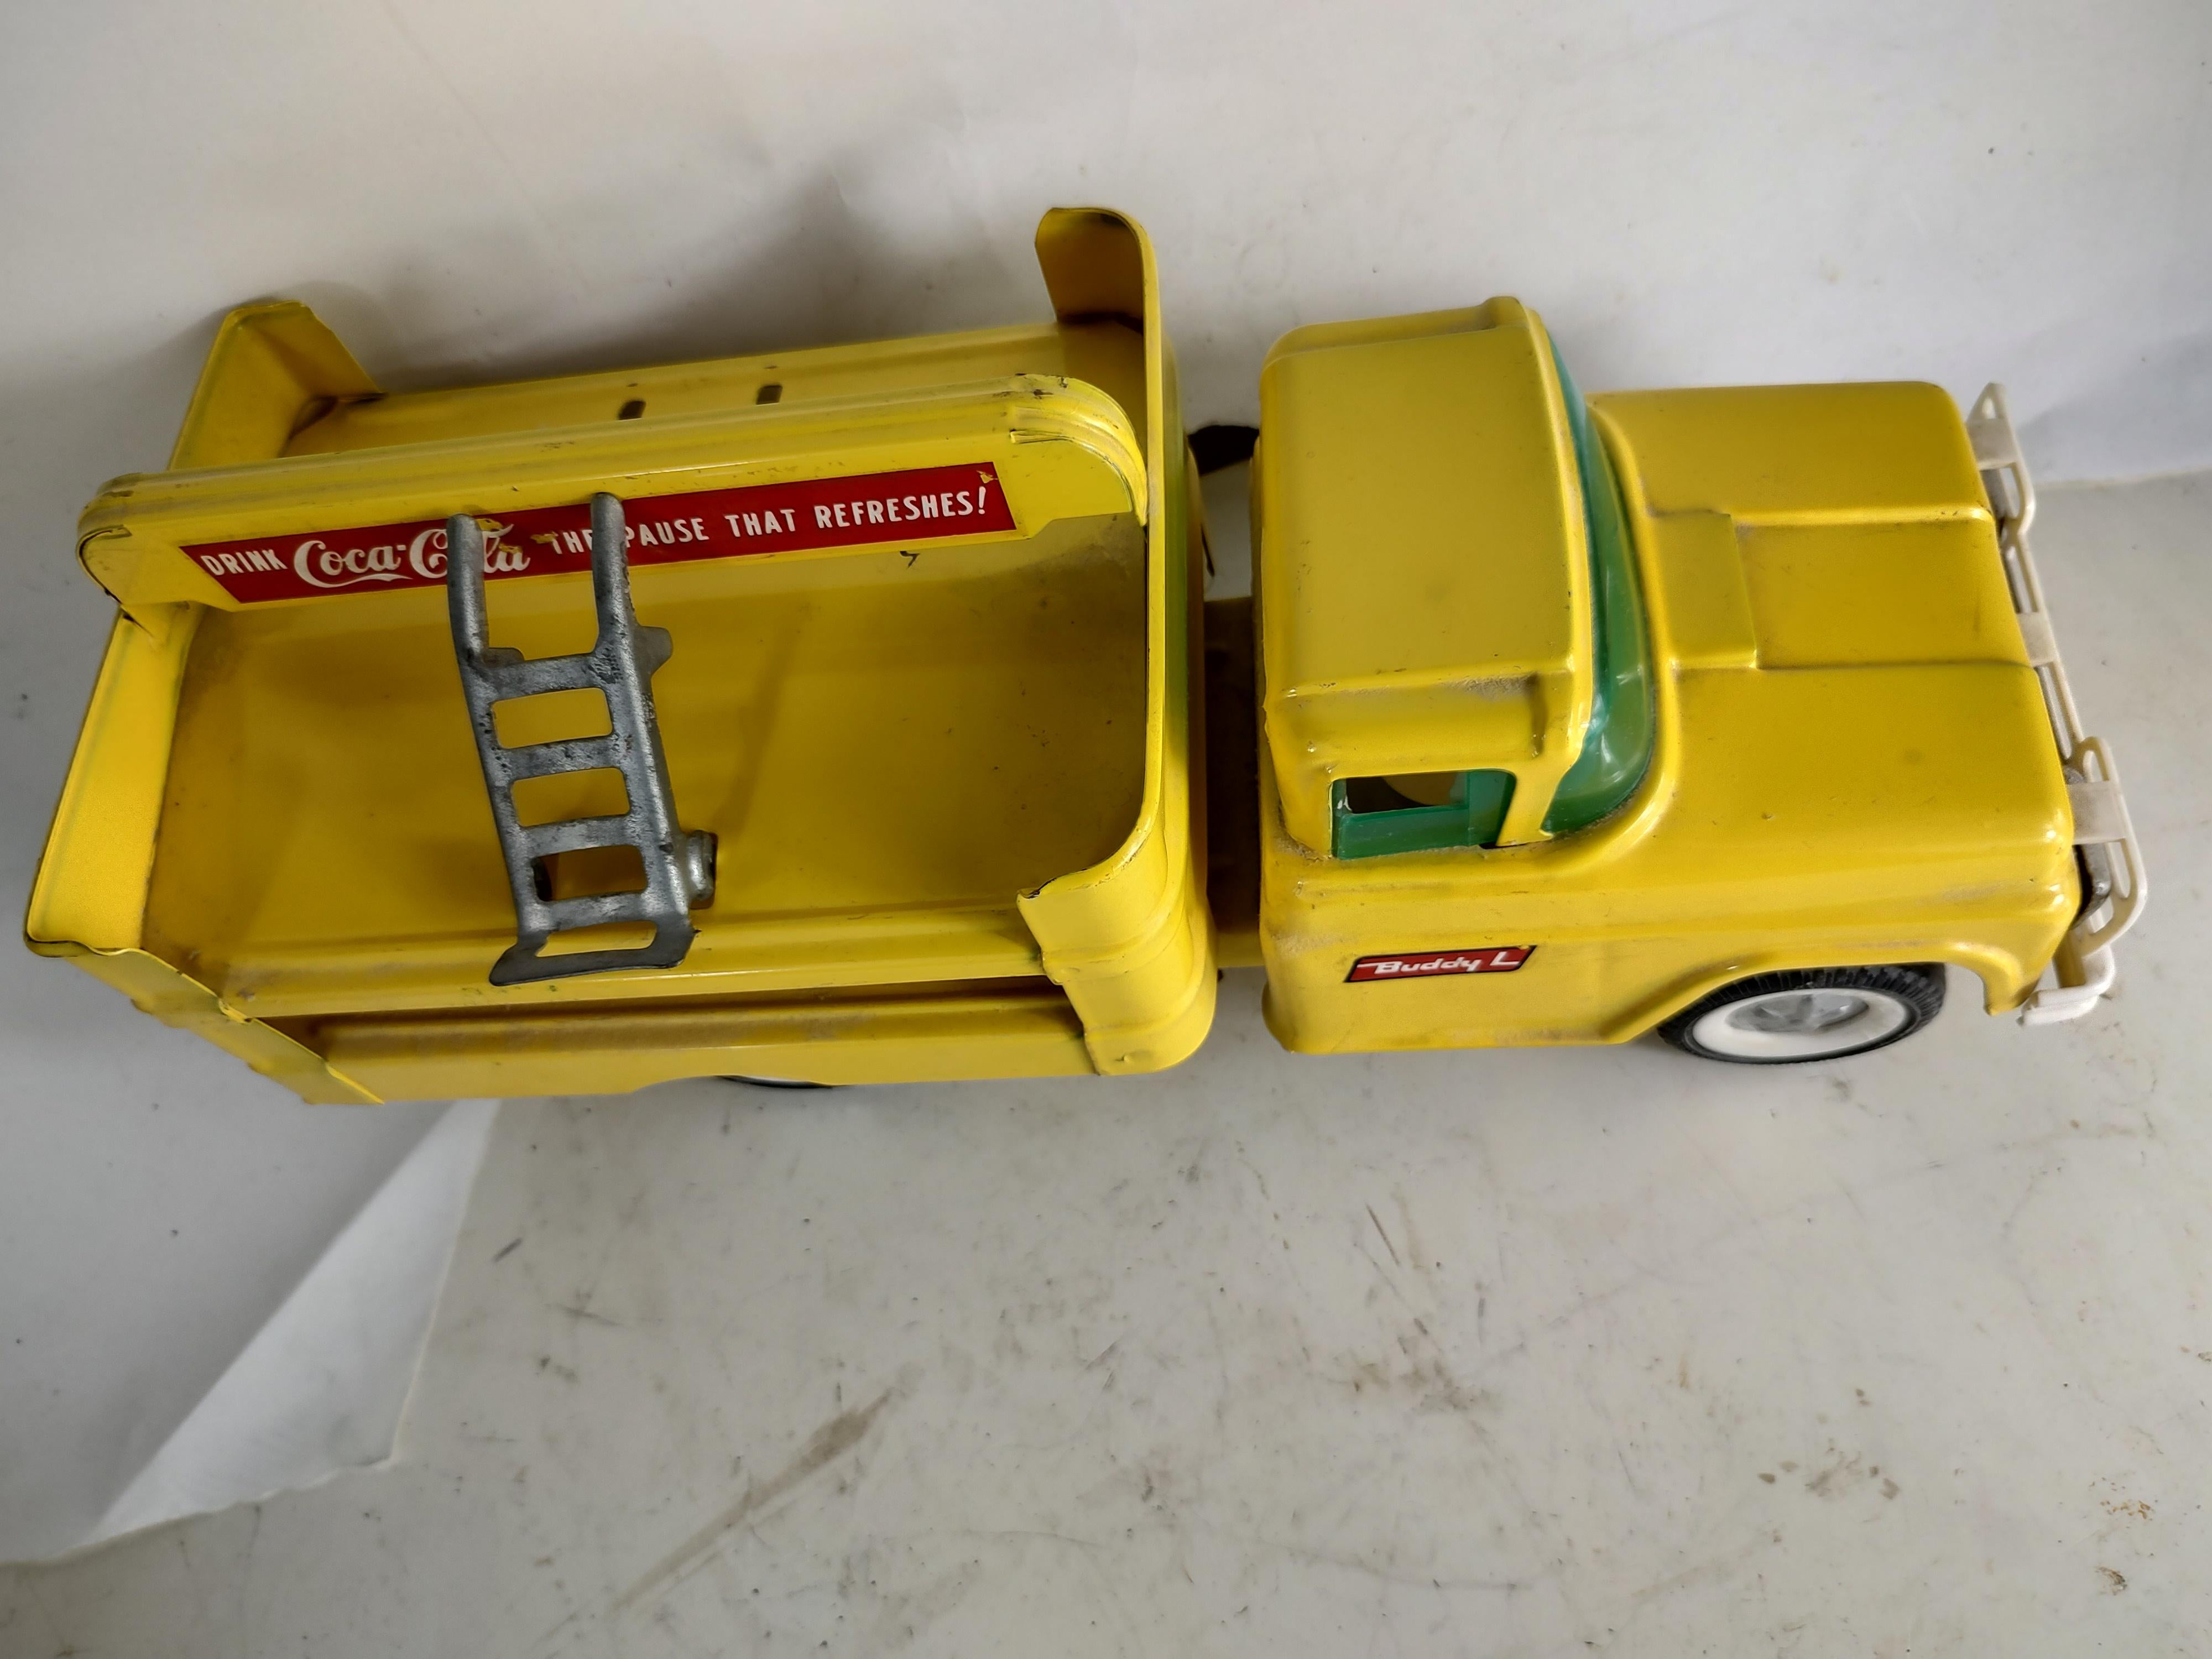 Fun coca cola truck by Buddy L from the late fifties and early sixties. In excellent used condition with minimal wear. No damage, possibly side mirror missing, has an aluminum hand truck. Front end is spring loaded and rolls along quote well.